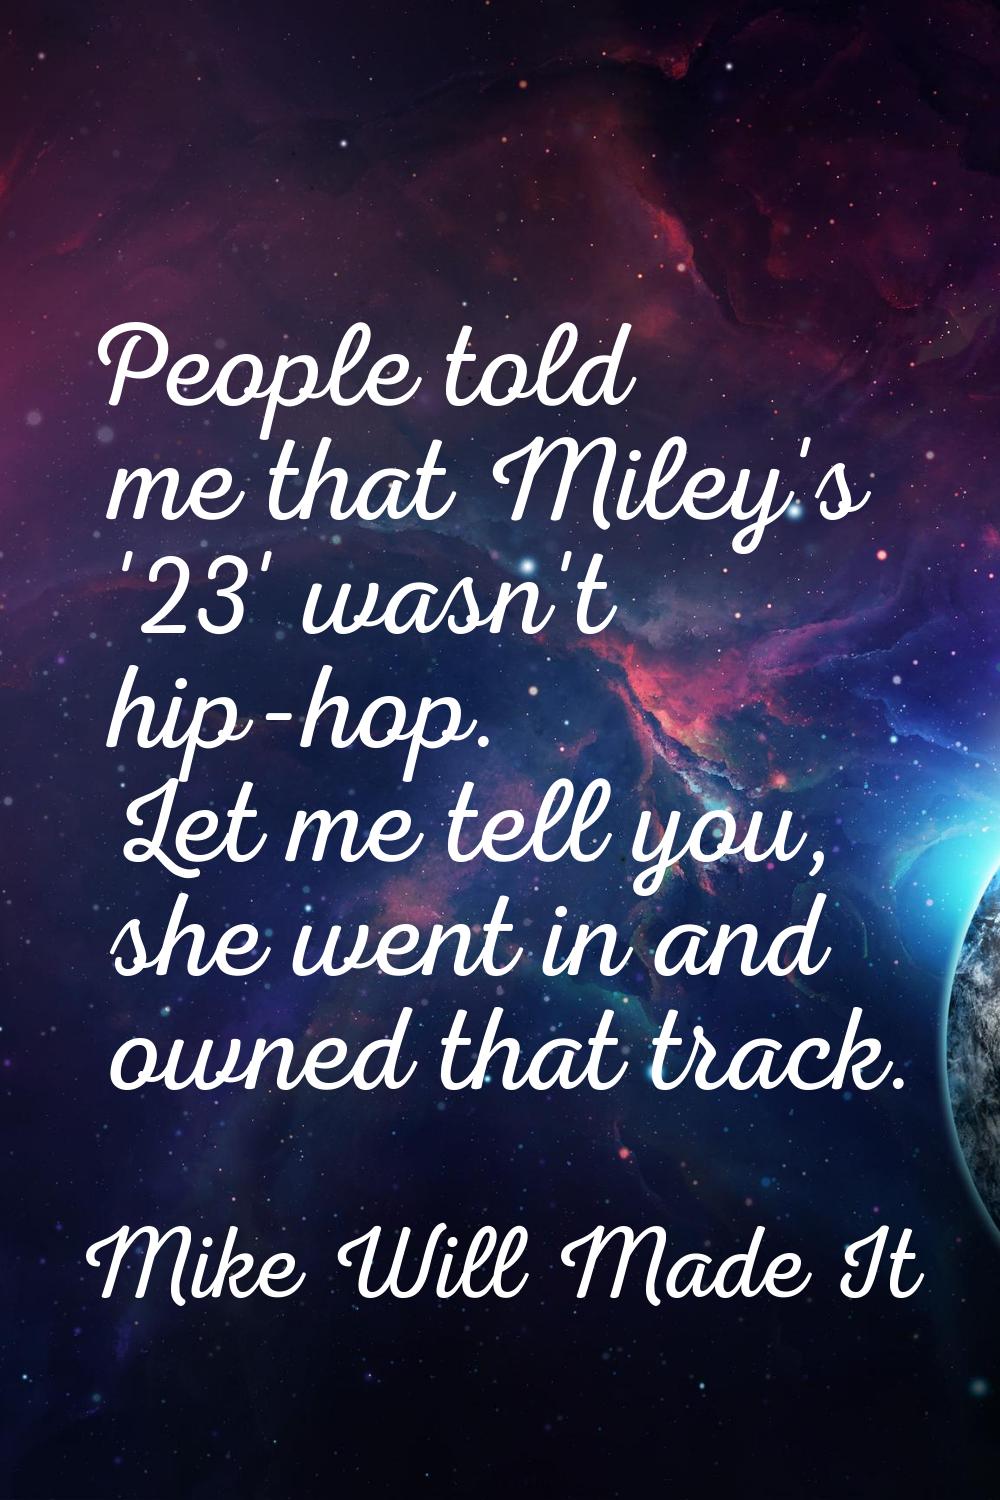 People told me that Miley's '23' wasn't hip-hop. Let me tell you, she went in and owned that track.